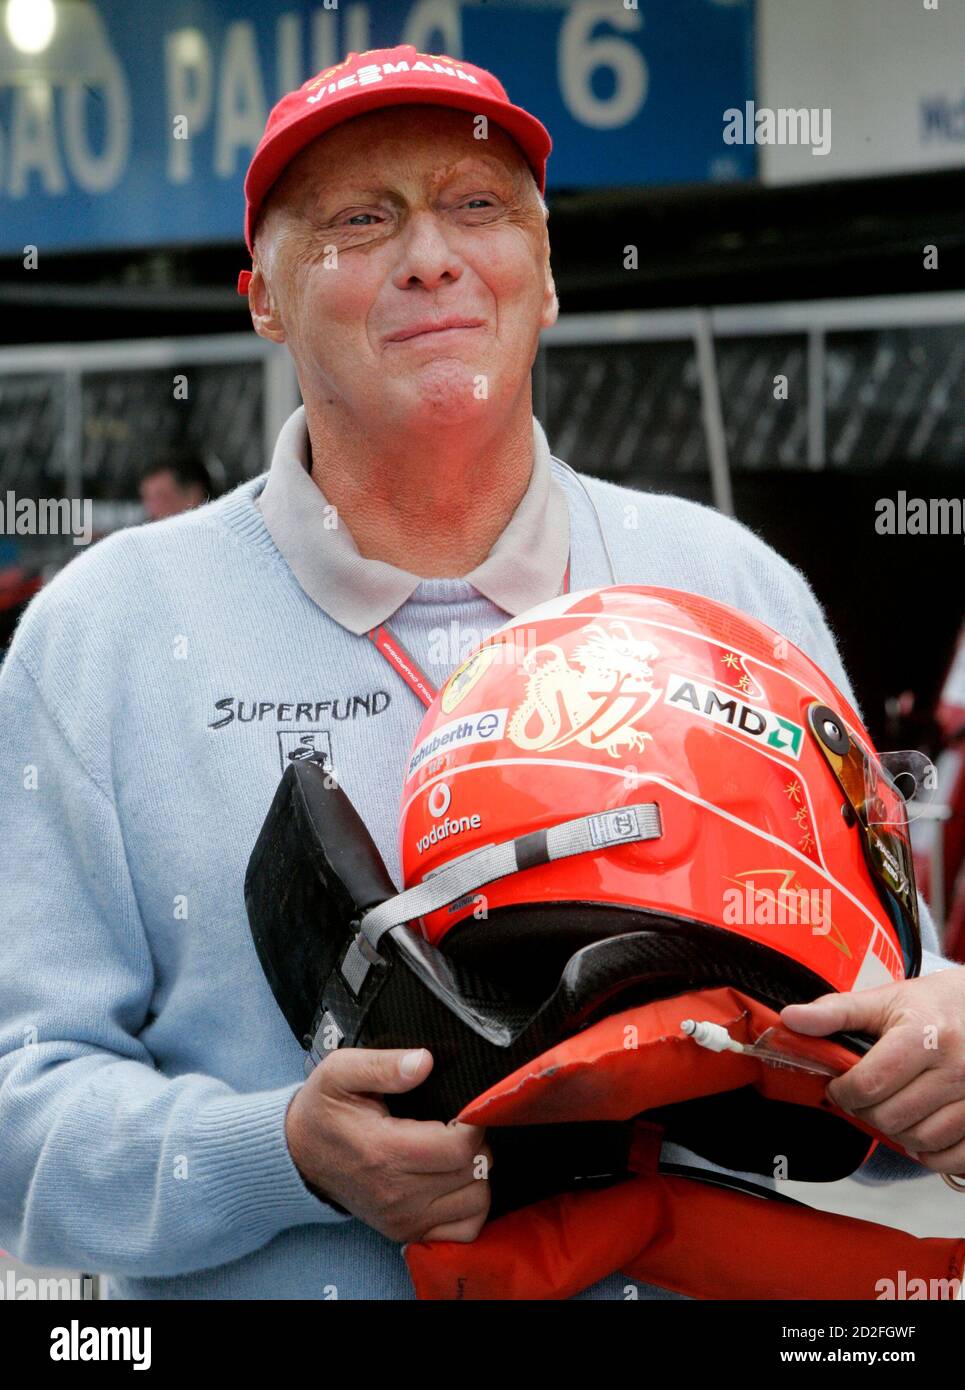 Niki Lauda, former Formula One world champion for the Ferrari team, holds  the helmet of Ferrari's current driver Michael Schumacher of Germany as  drivers prepared for the time trial at the Interlagos